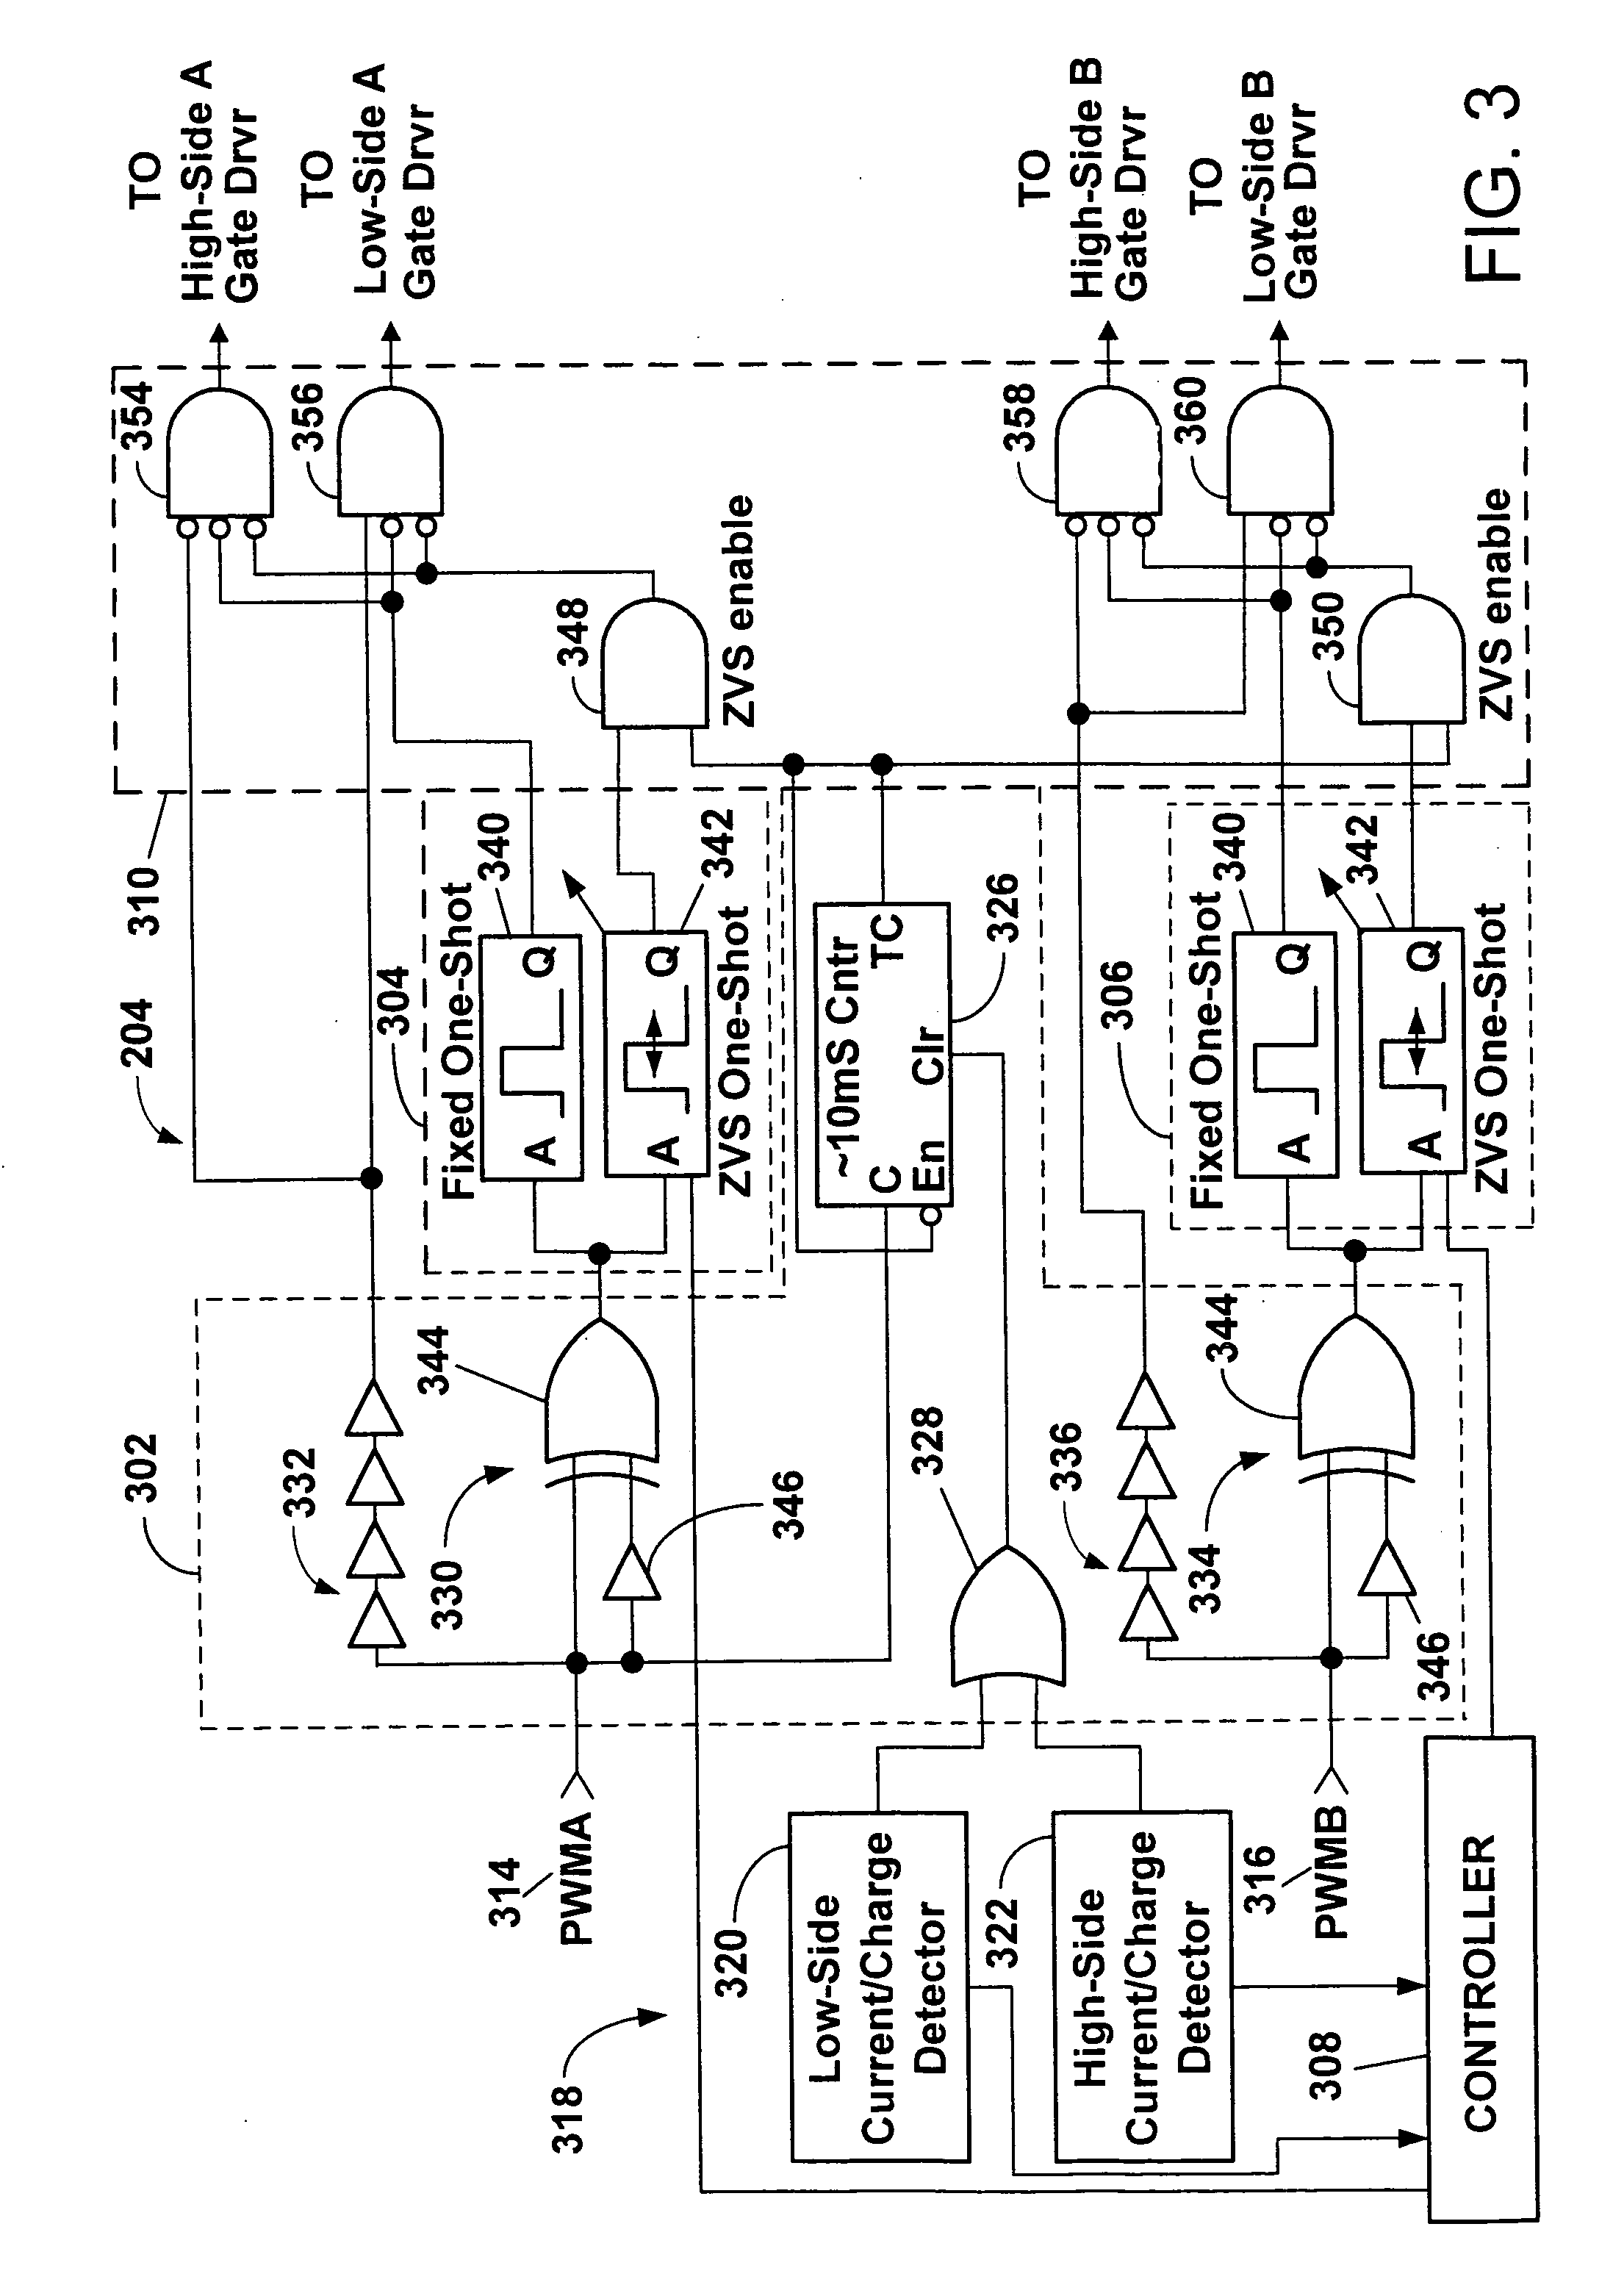 Automatic zero voltage switching mode controller